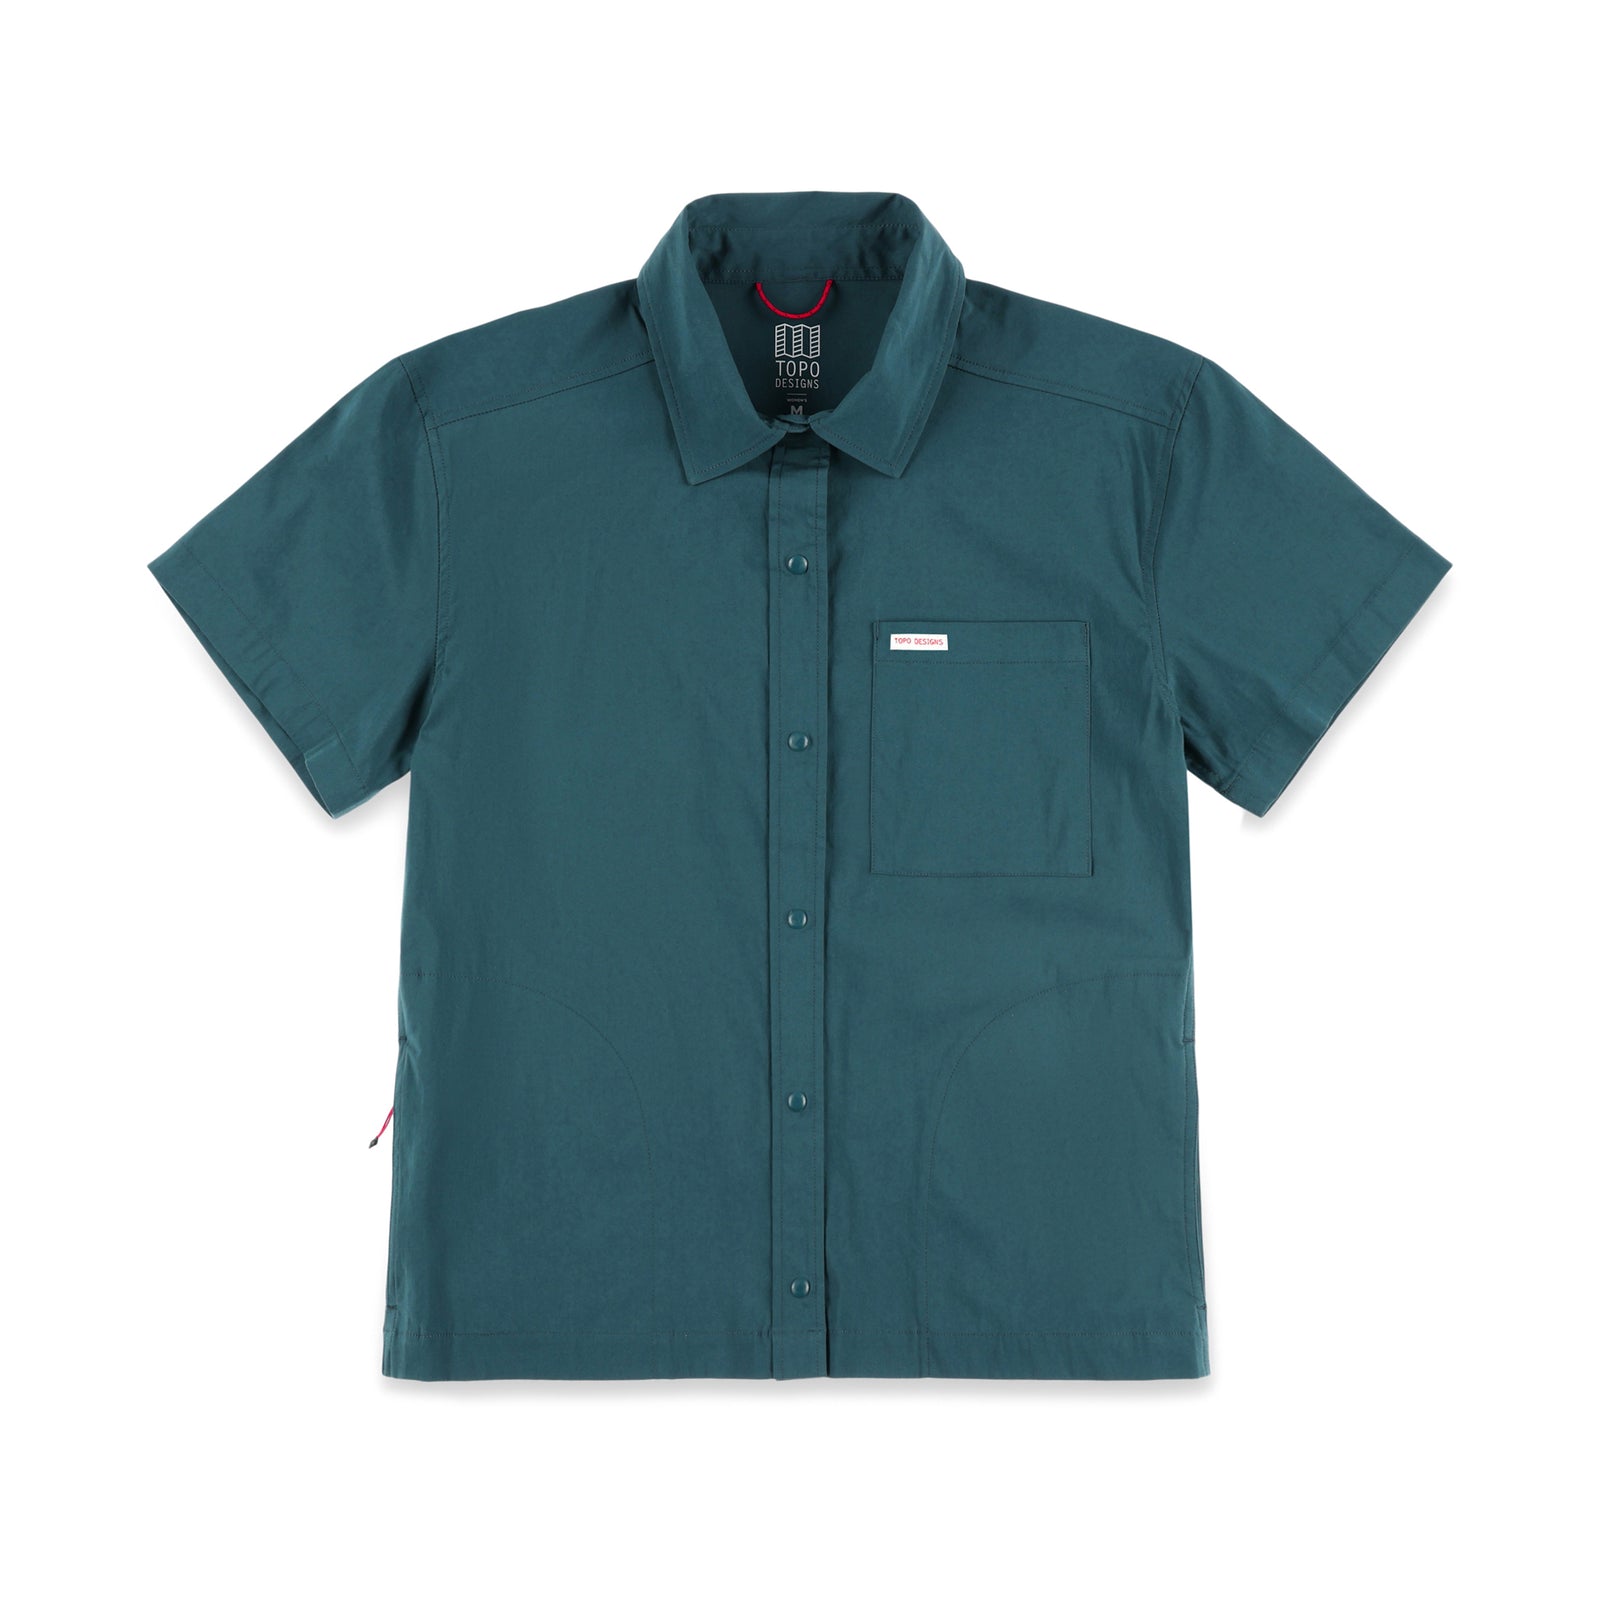 Topo Designs Women's Global Shirt Short Sleeve 30+ UPF rated travel shirt in "Pond Blue".